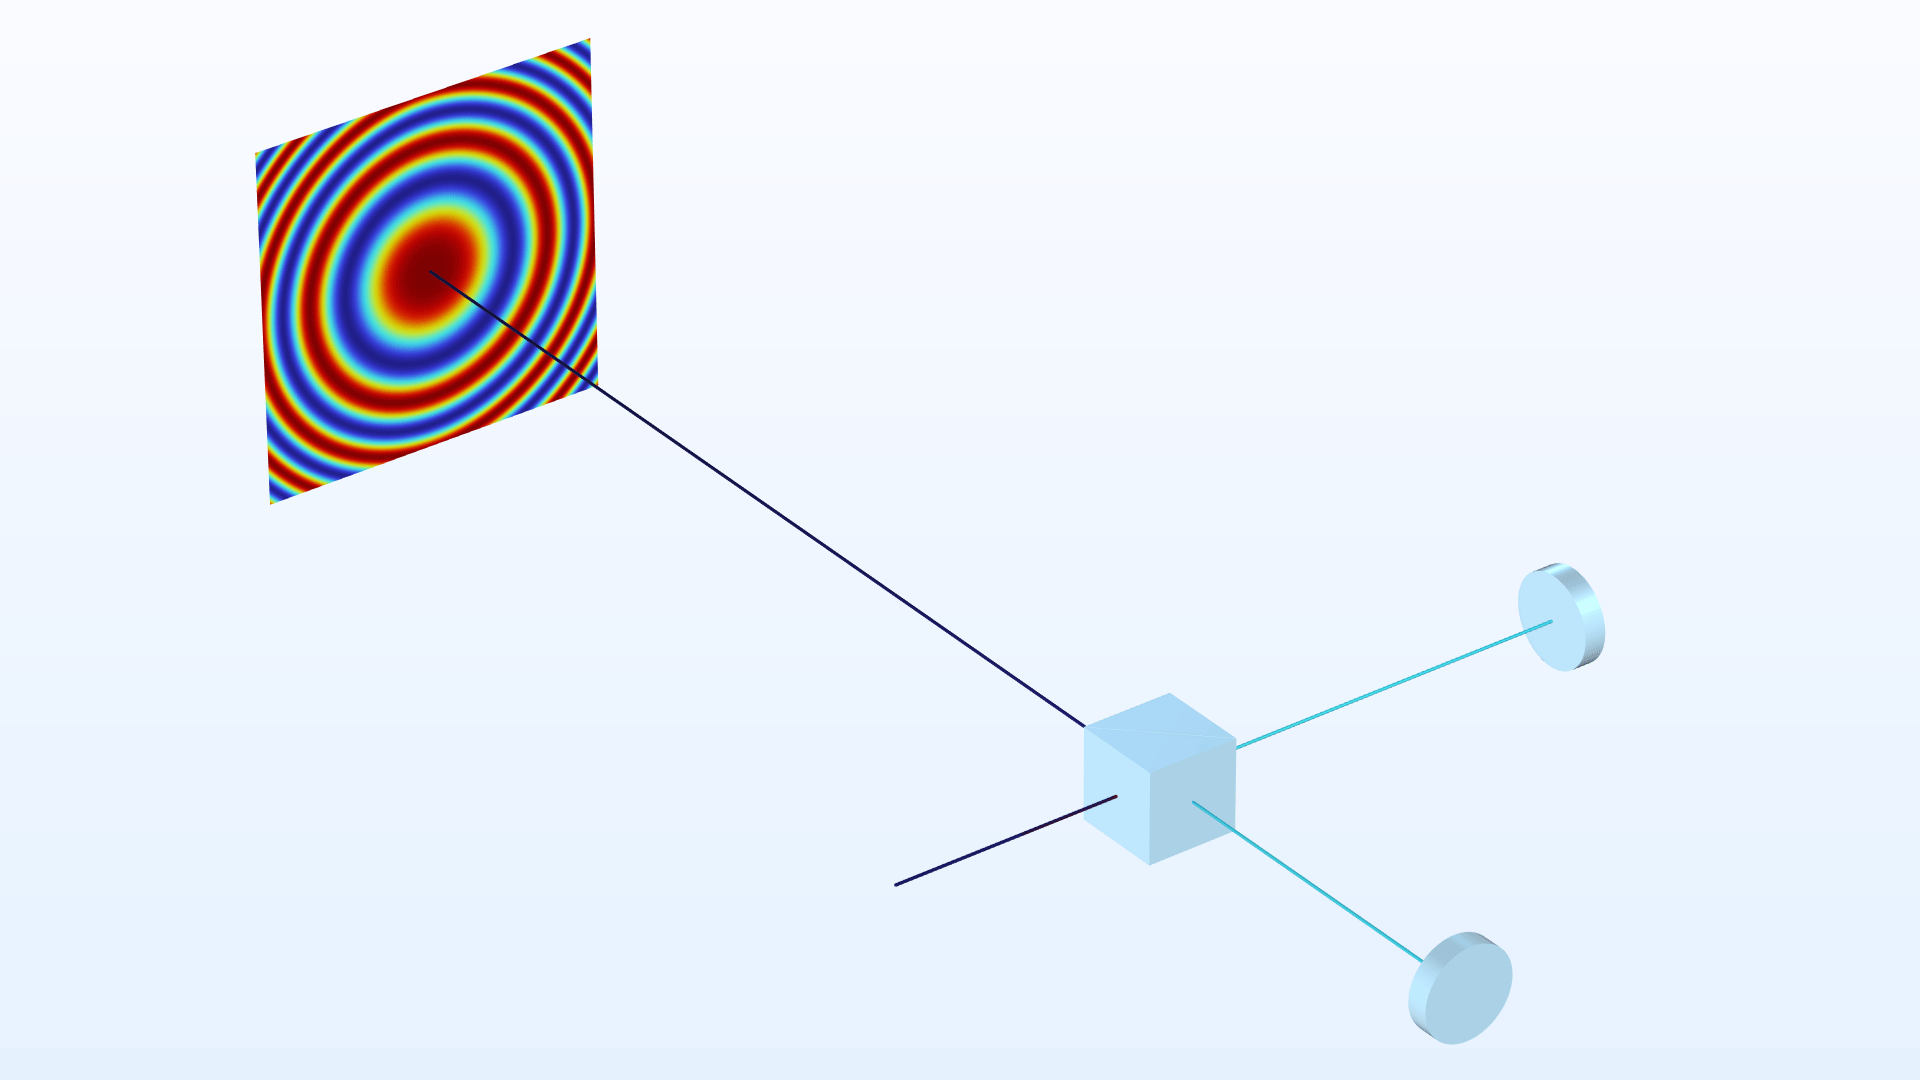 An interferometer model showing an interference pattern in the Rainbow color table.